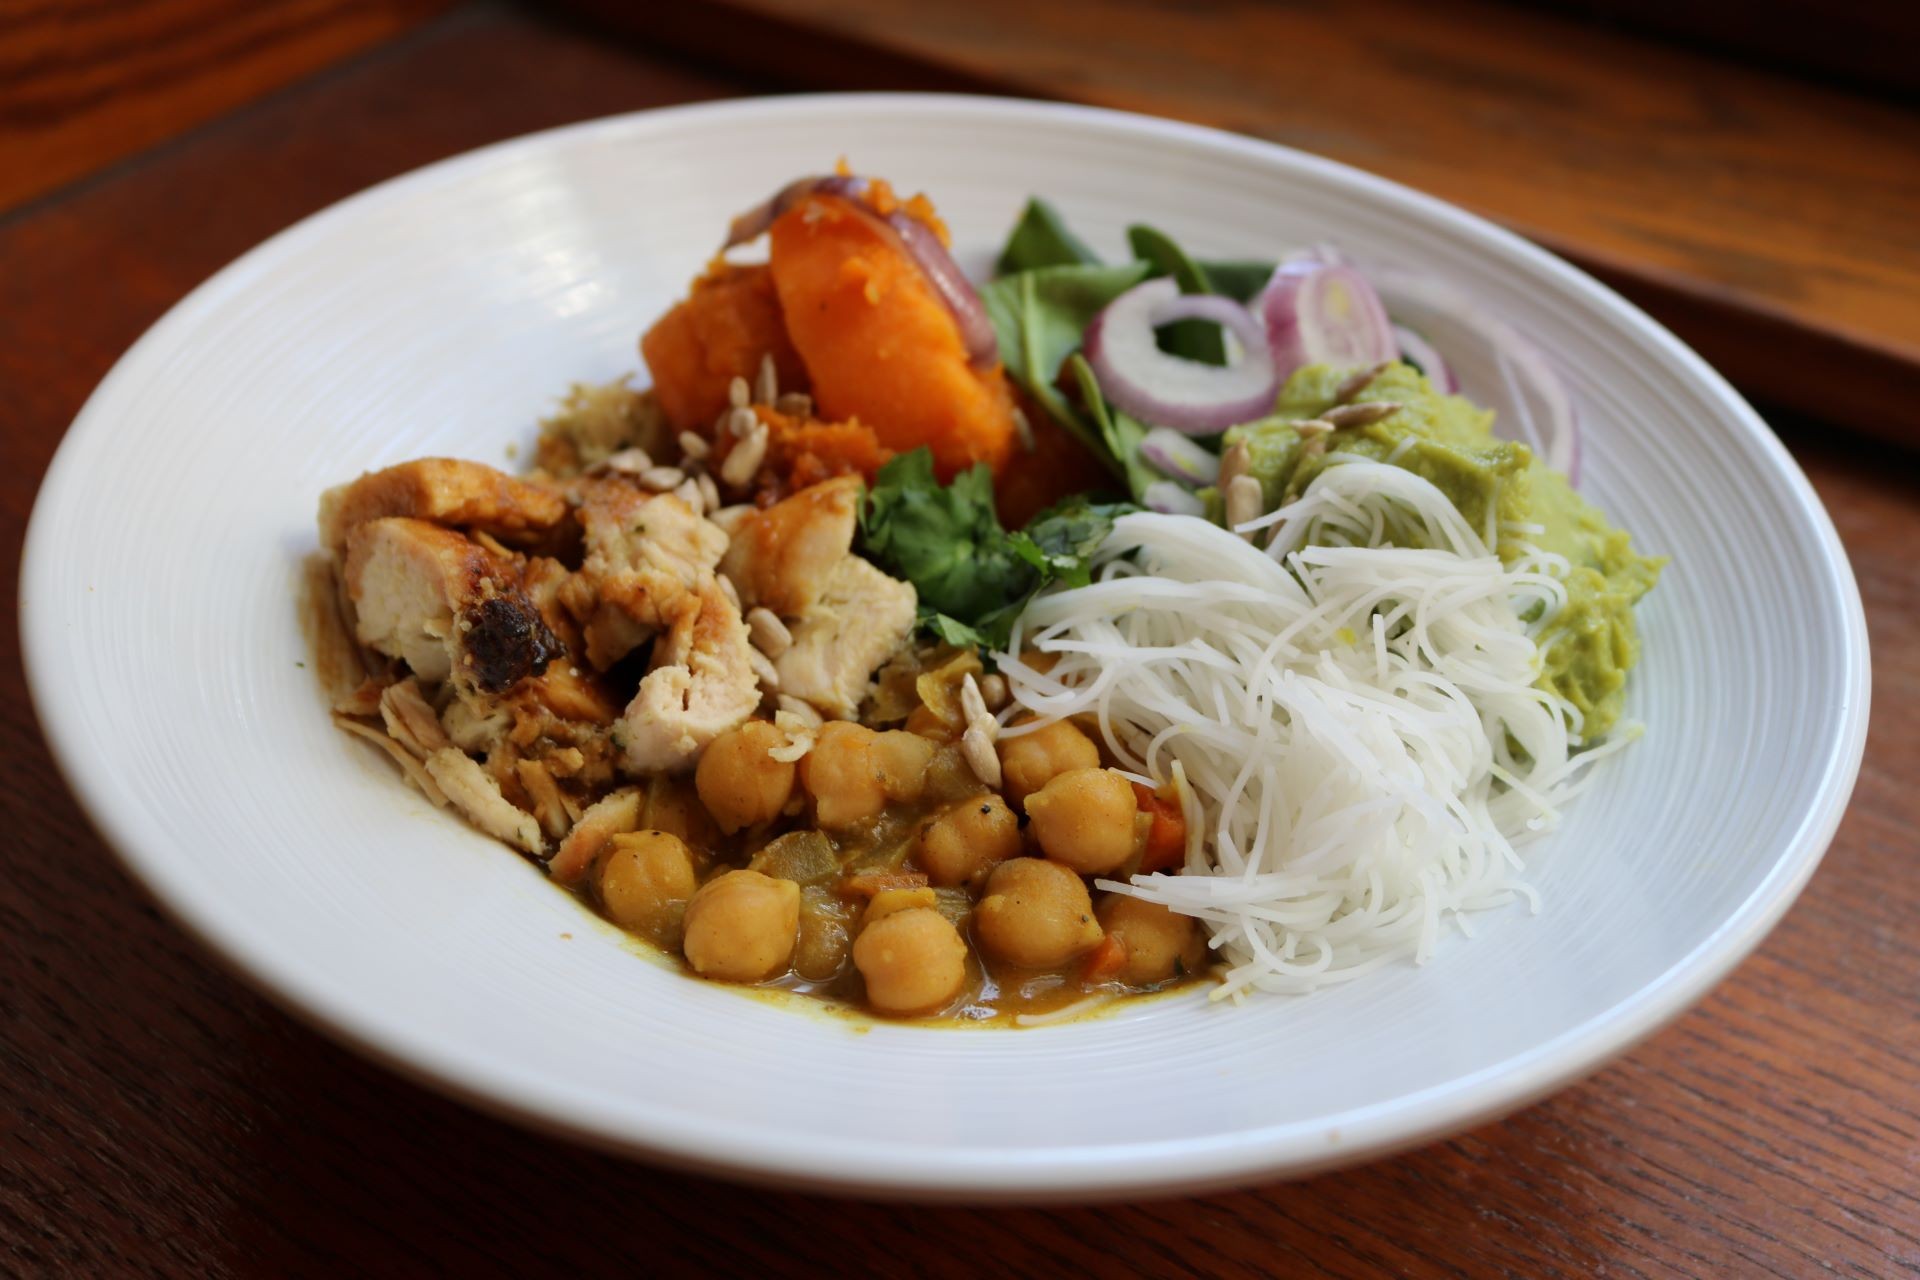 Thai sunbutter buddha bowl with chicken, chick peas, roasted sweet potato, rice noodles, avocado, spinach, and red onions.